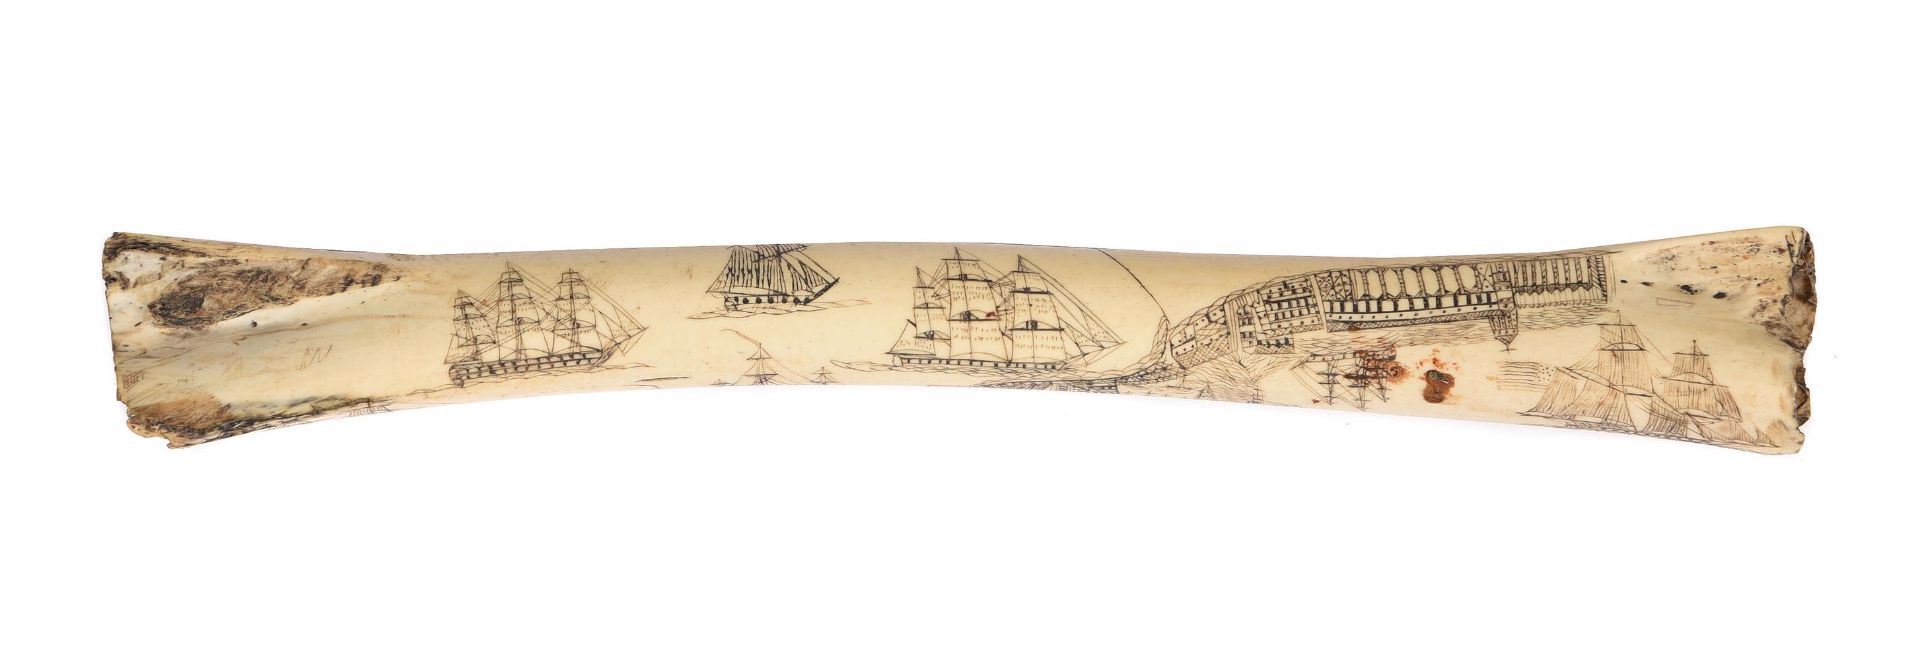 A MARINE SCRIMSHAW DECORATED BONE POSSIBLY NORTH EUROPEAN OR TURKISH - Image 2 of 2